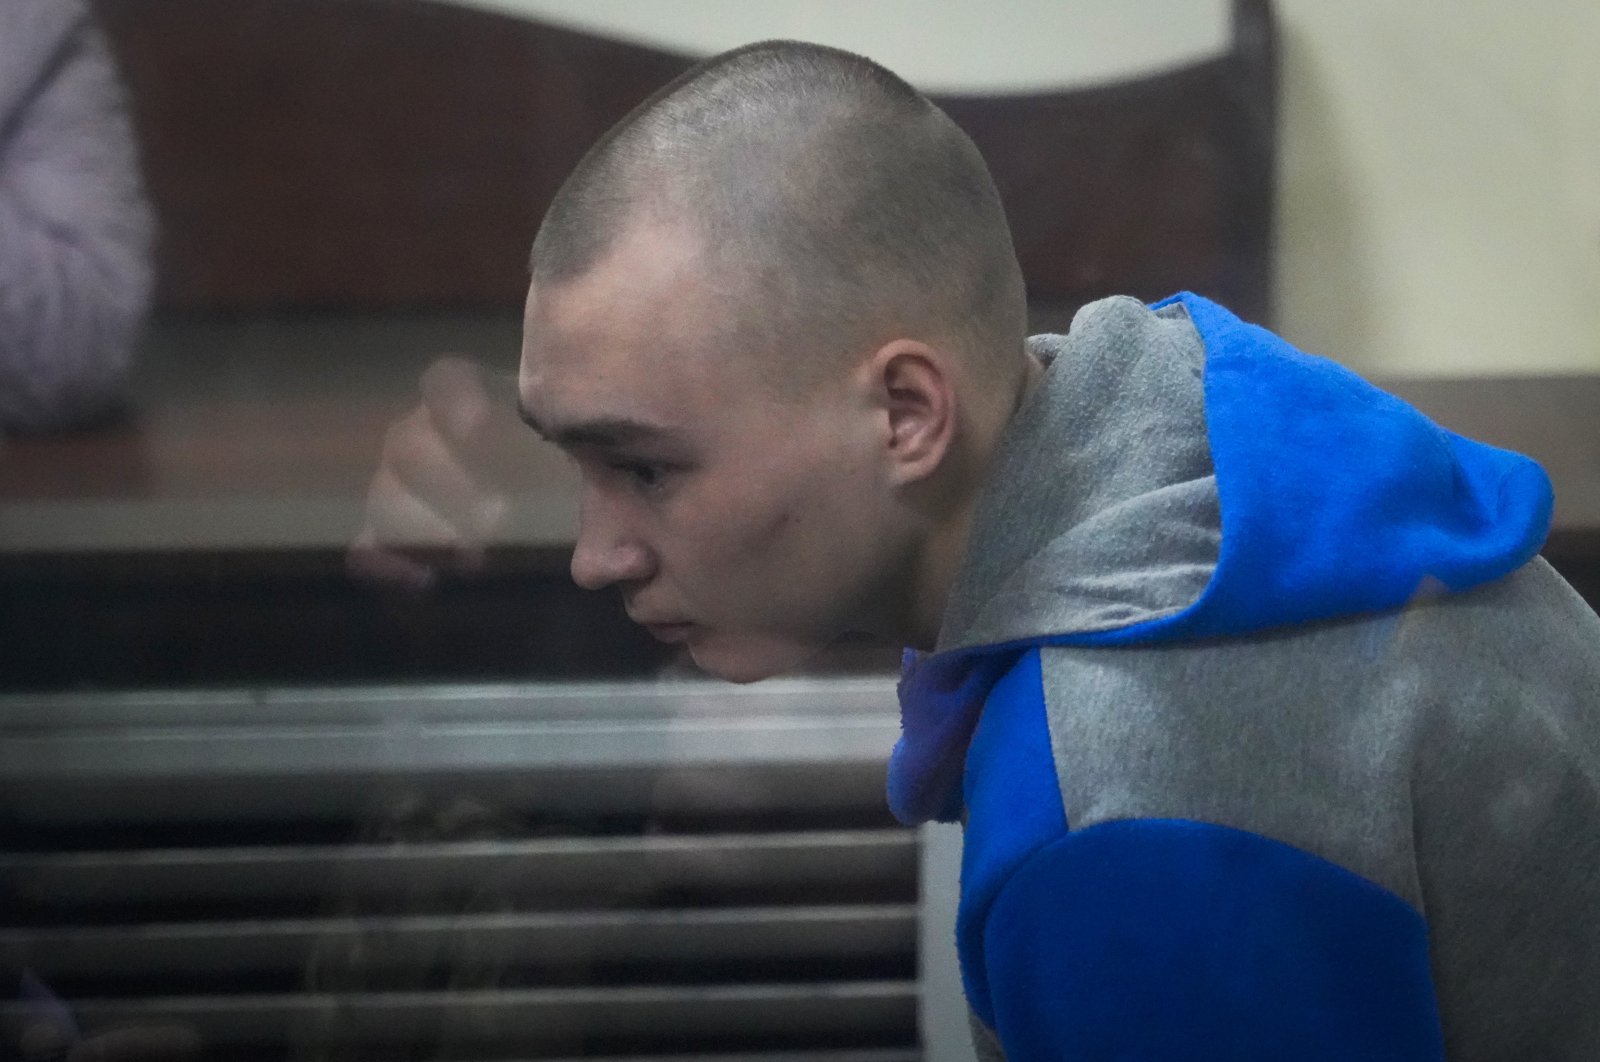 Russian Sgt. Vadim Shishimarin is seen behind glass during a court hearing in Kyiv, Ukraine, May 18, 2022. (AP Photo)